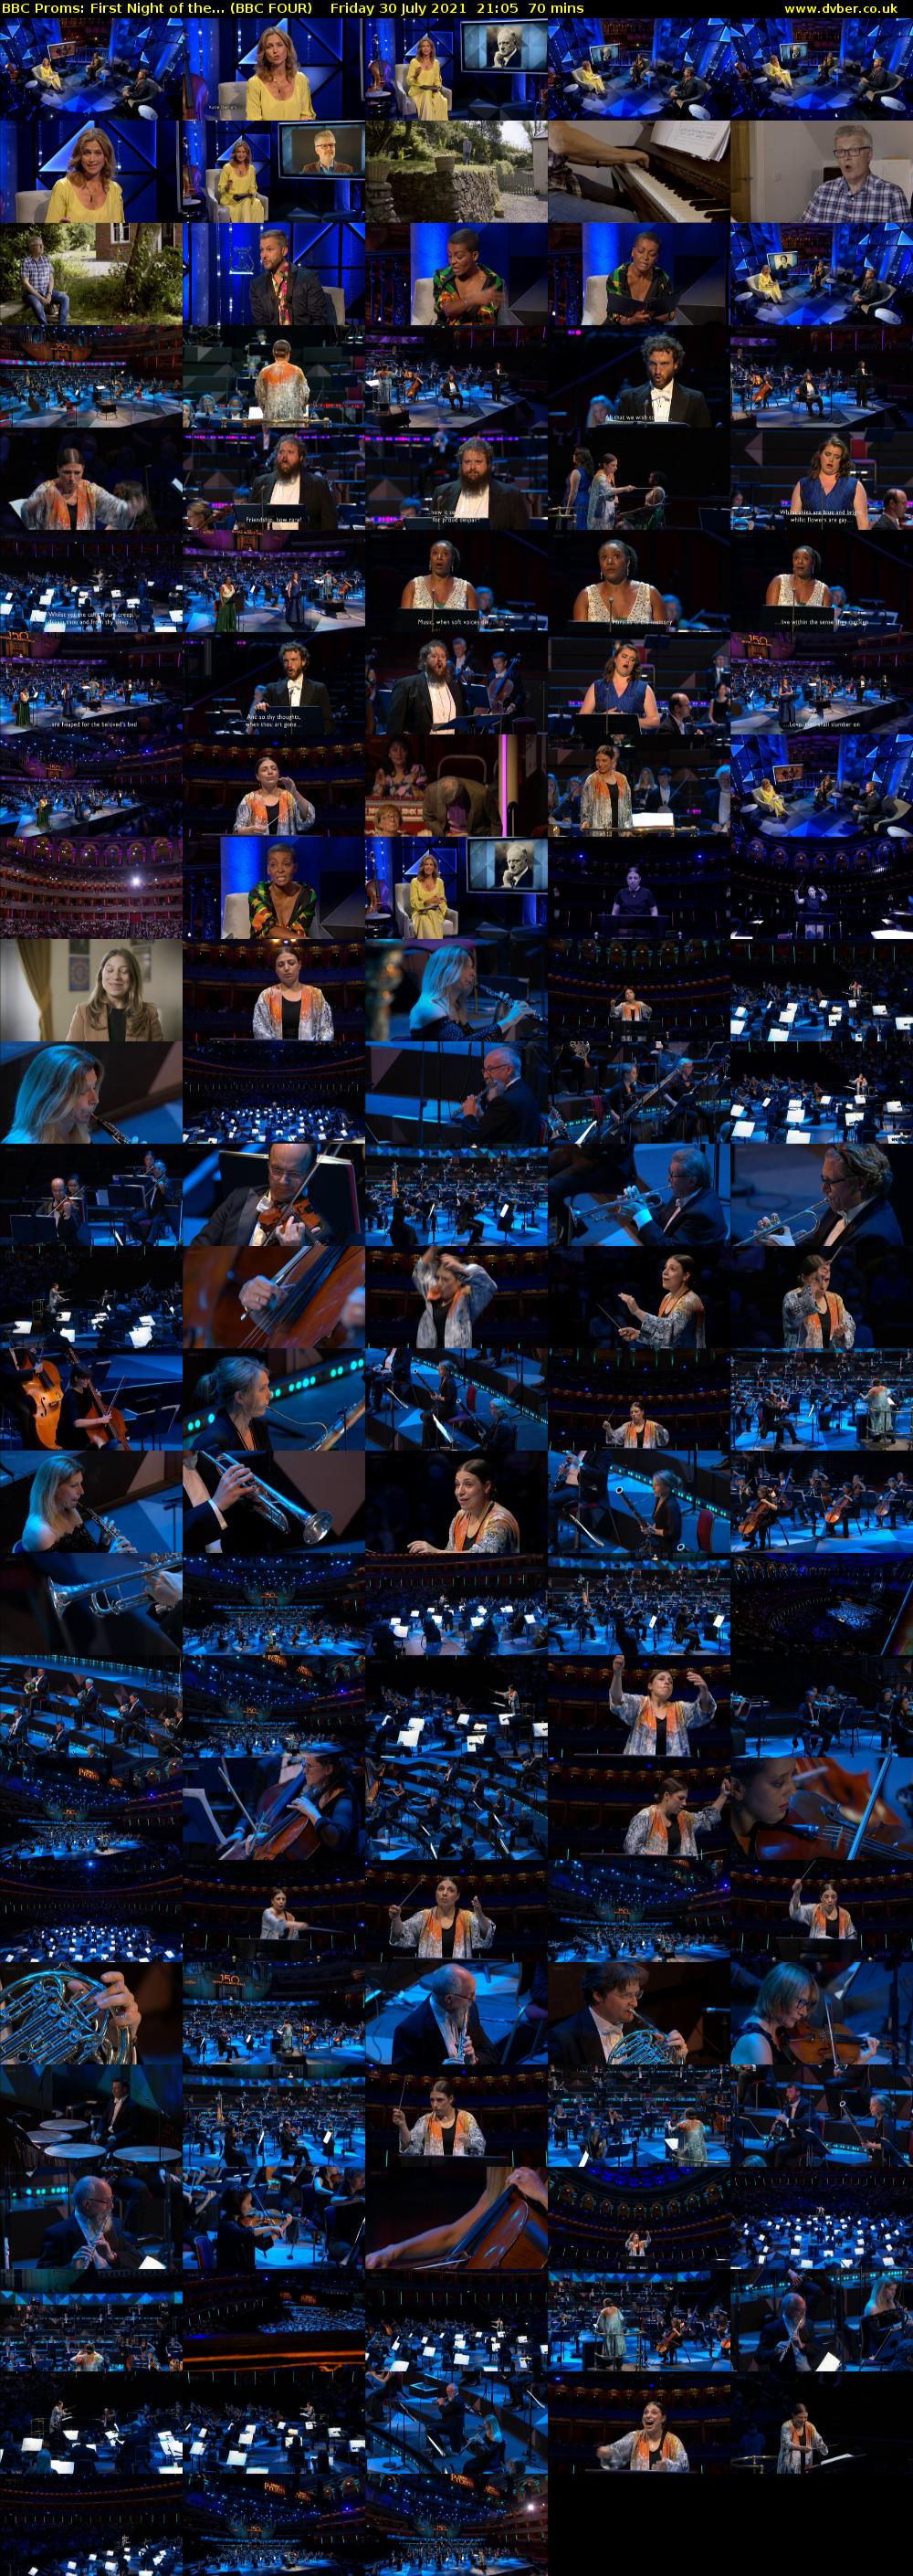 BBC Proms: First Night of the... (BBC FOUR) Friday 30 July 2021 21:05 - 22:15